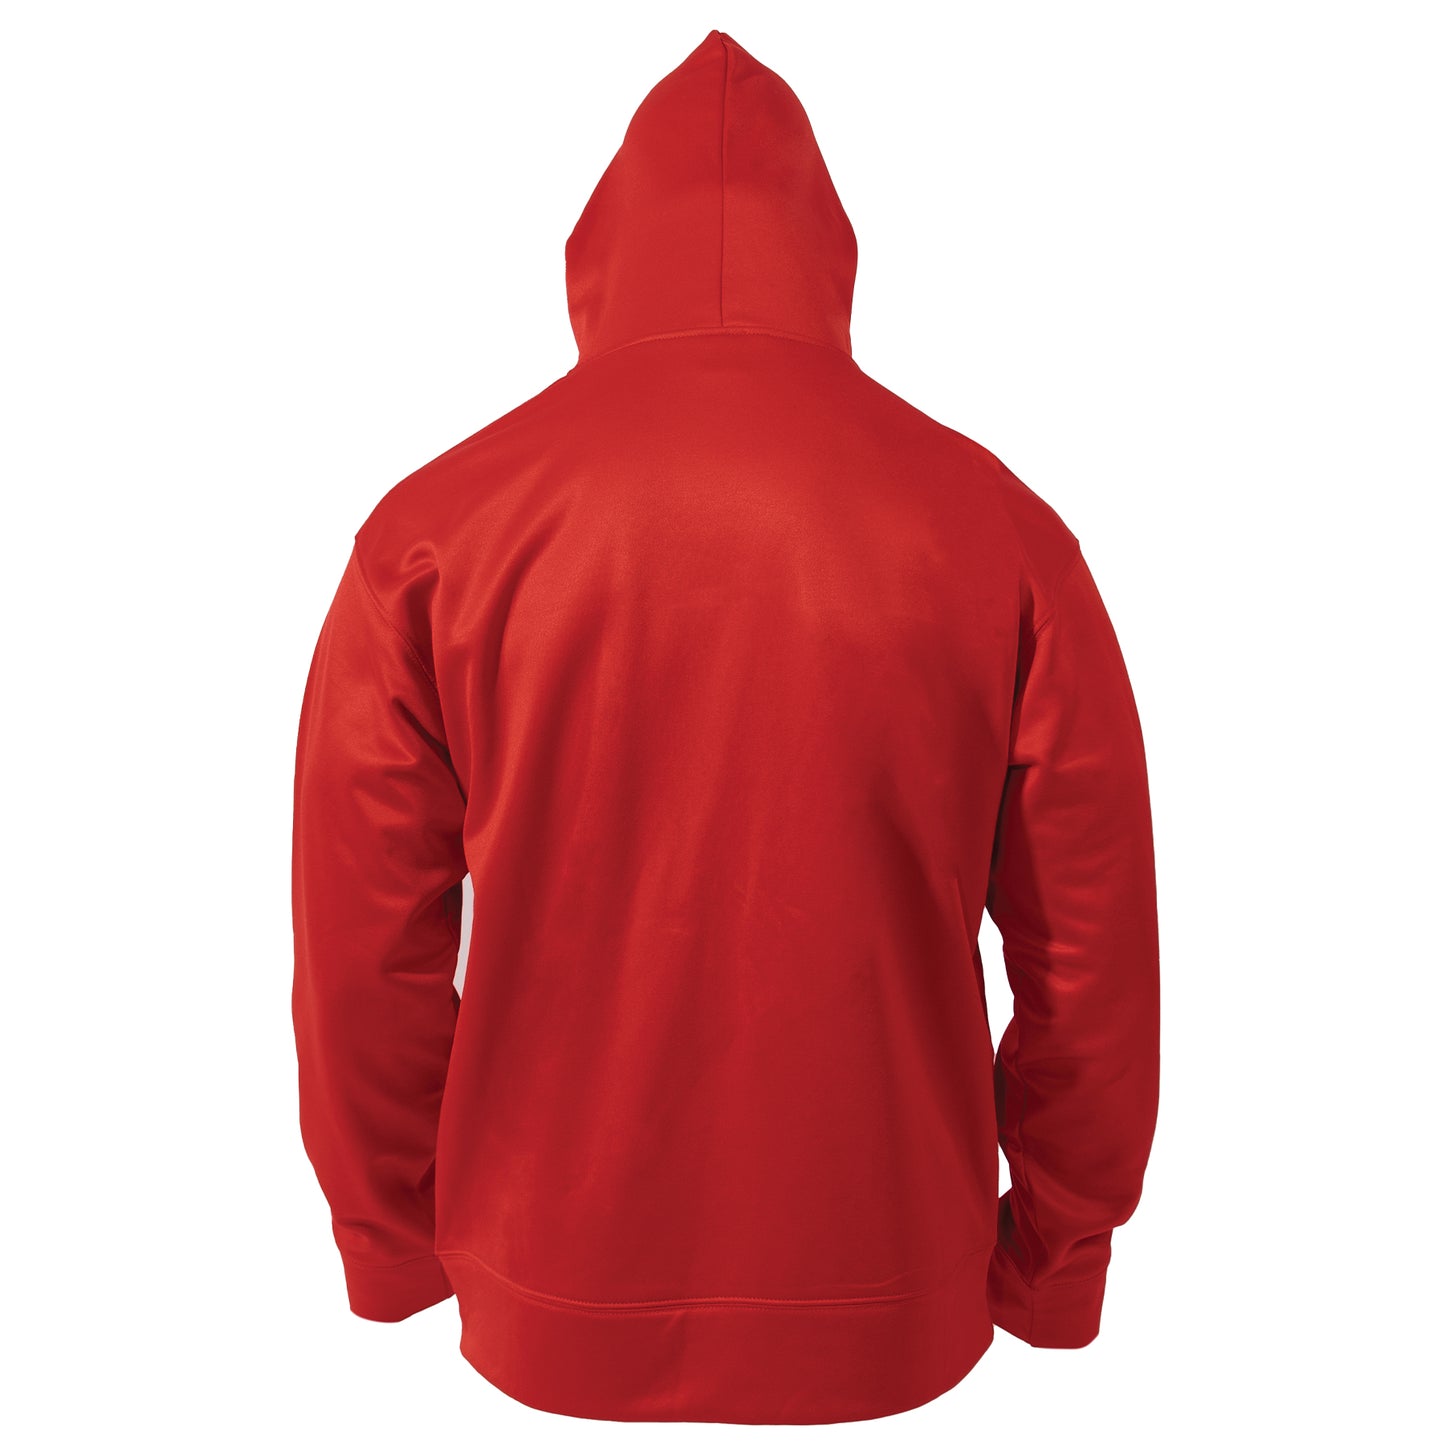 Hoodie: USMC Eagle, Globe, and Anchor on Red